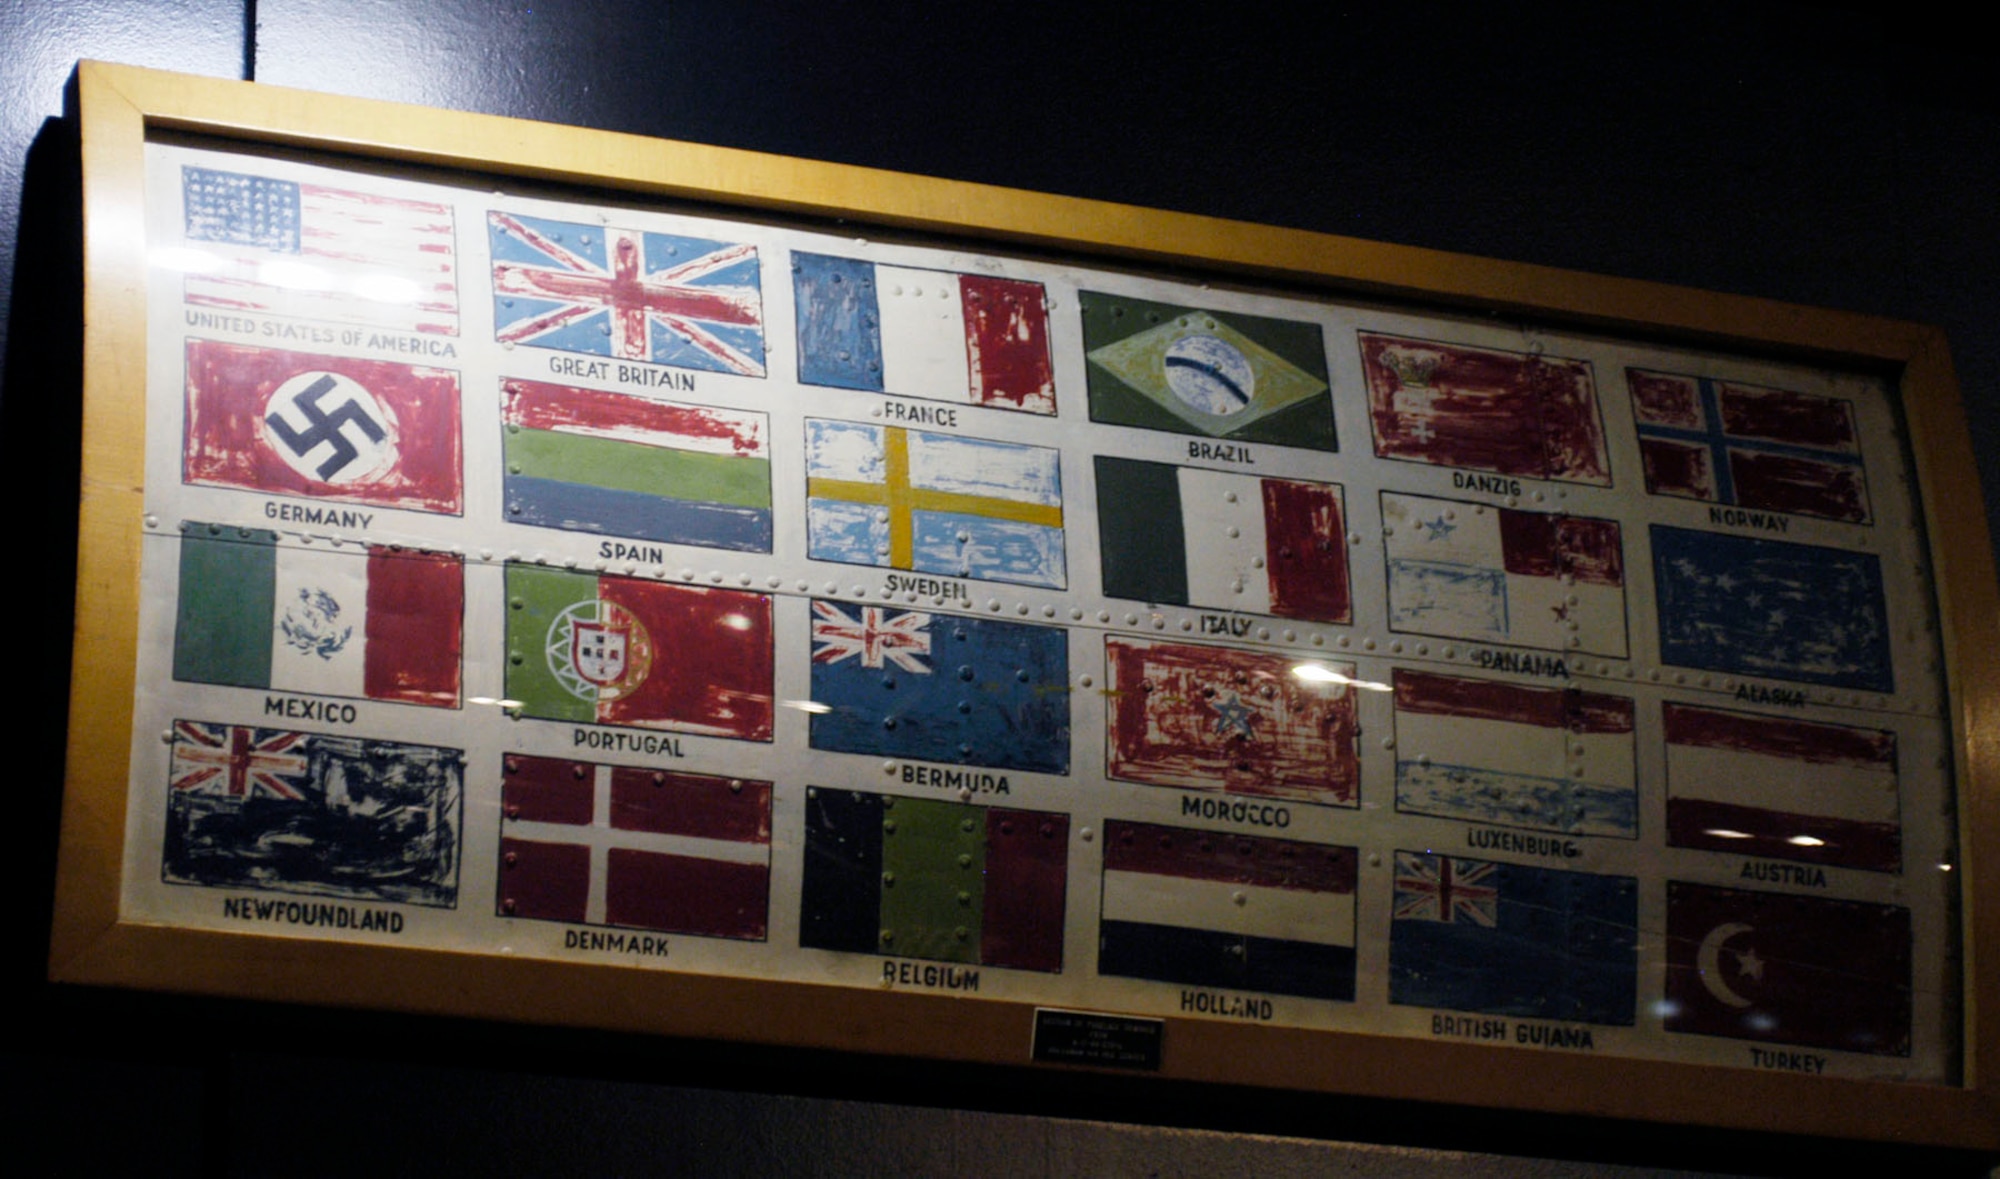 DAYTON, Ohio -- This section of B-17G fuselage, with flags of the various nations over which it had flown during World War II, is on display in the World War II Gallery at the National Museum of the U.S. Air Force. Donated by Mr. Milton Caniff, Palm Springs, Calif. (U.S. Air Force photo)